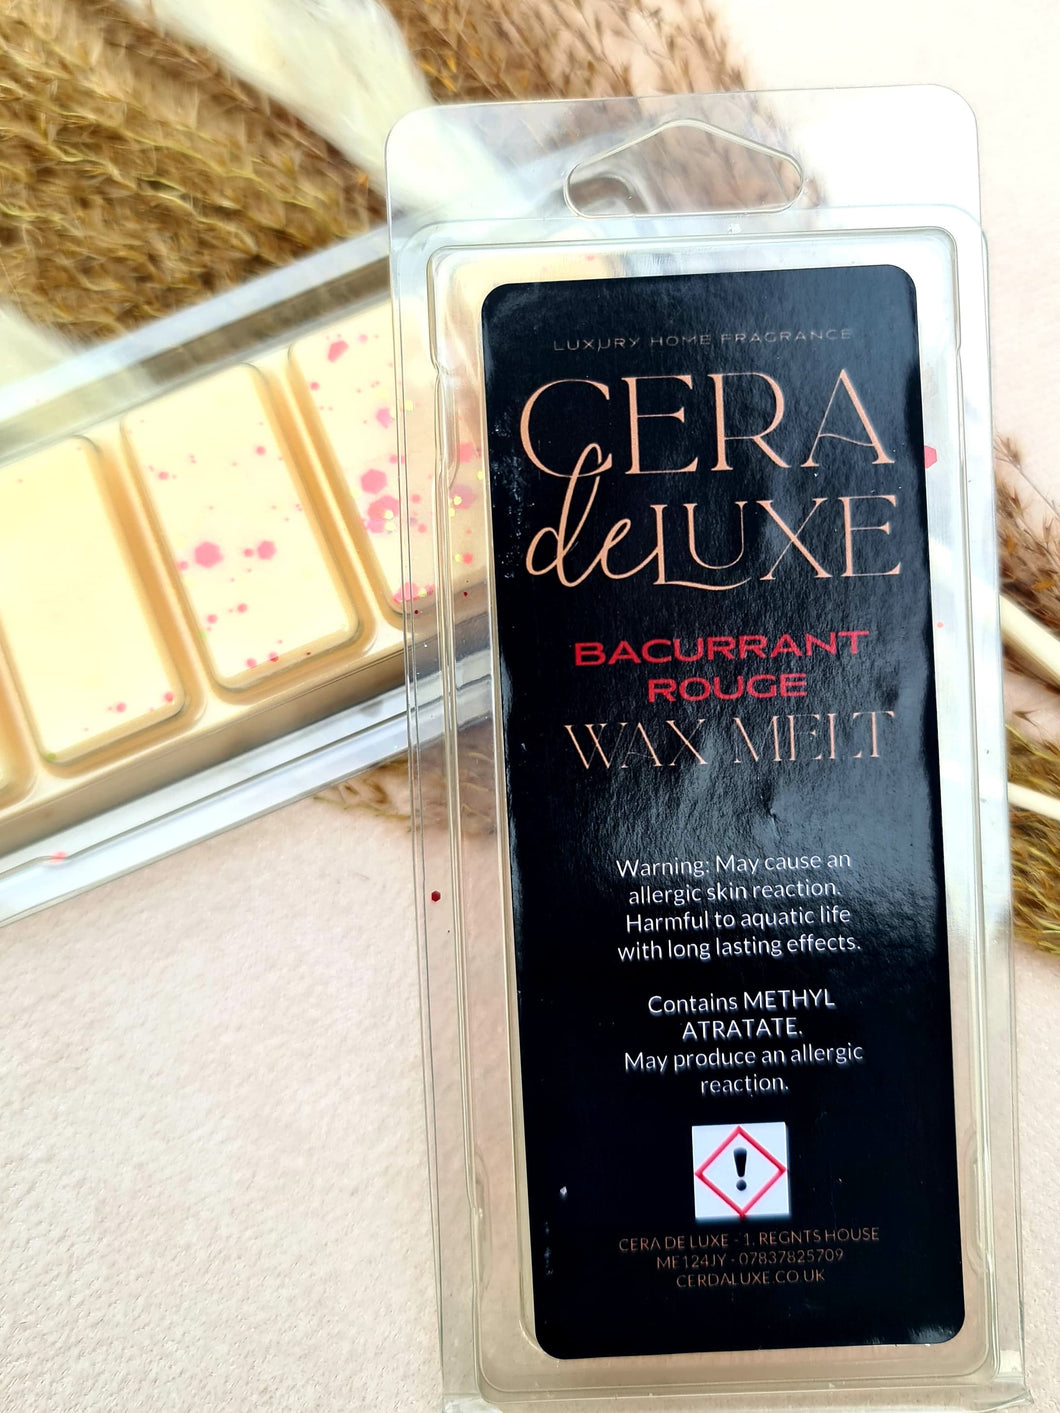 BACURRANT ROUGE - Cera De Luxe - Luxury Home Fragrance